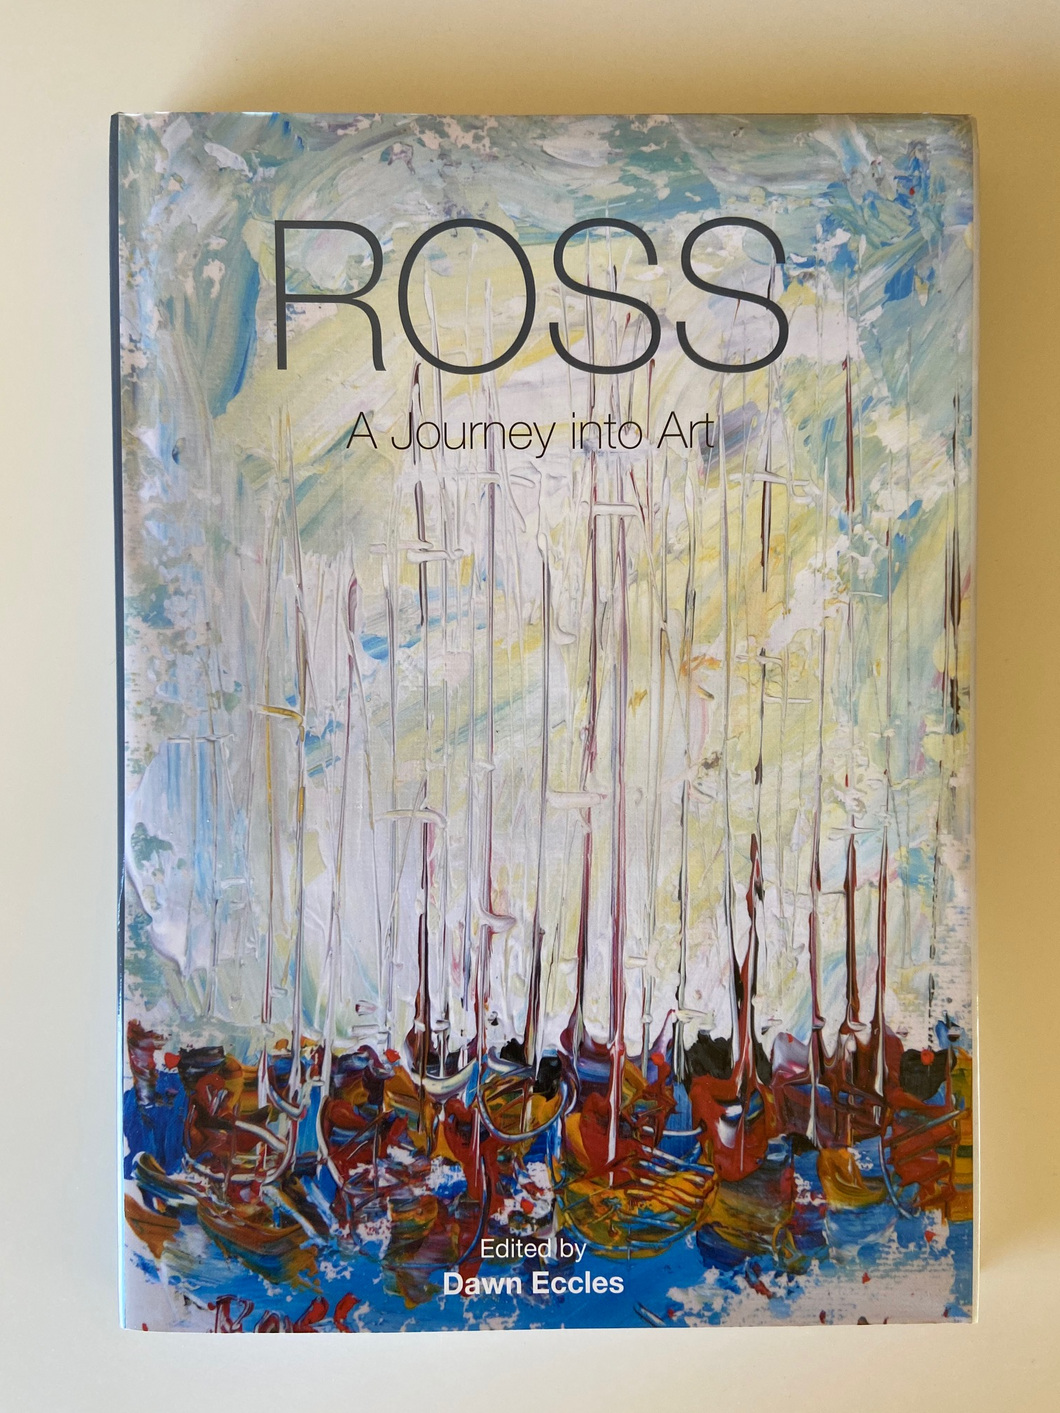 Ross Eccles Book - Ross: A Journey Into Art - a book about the artist's life and style